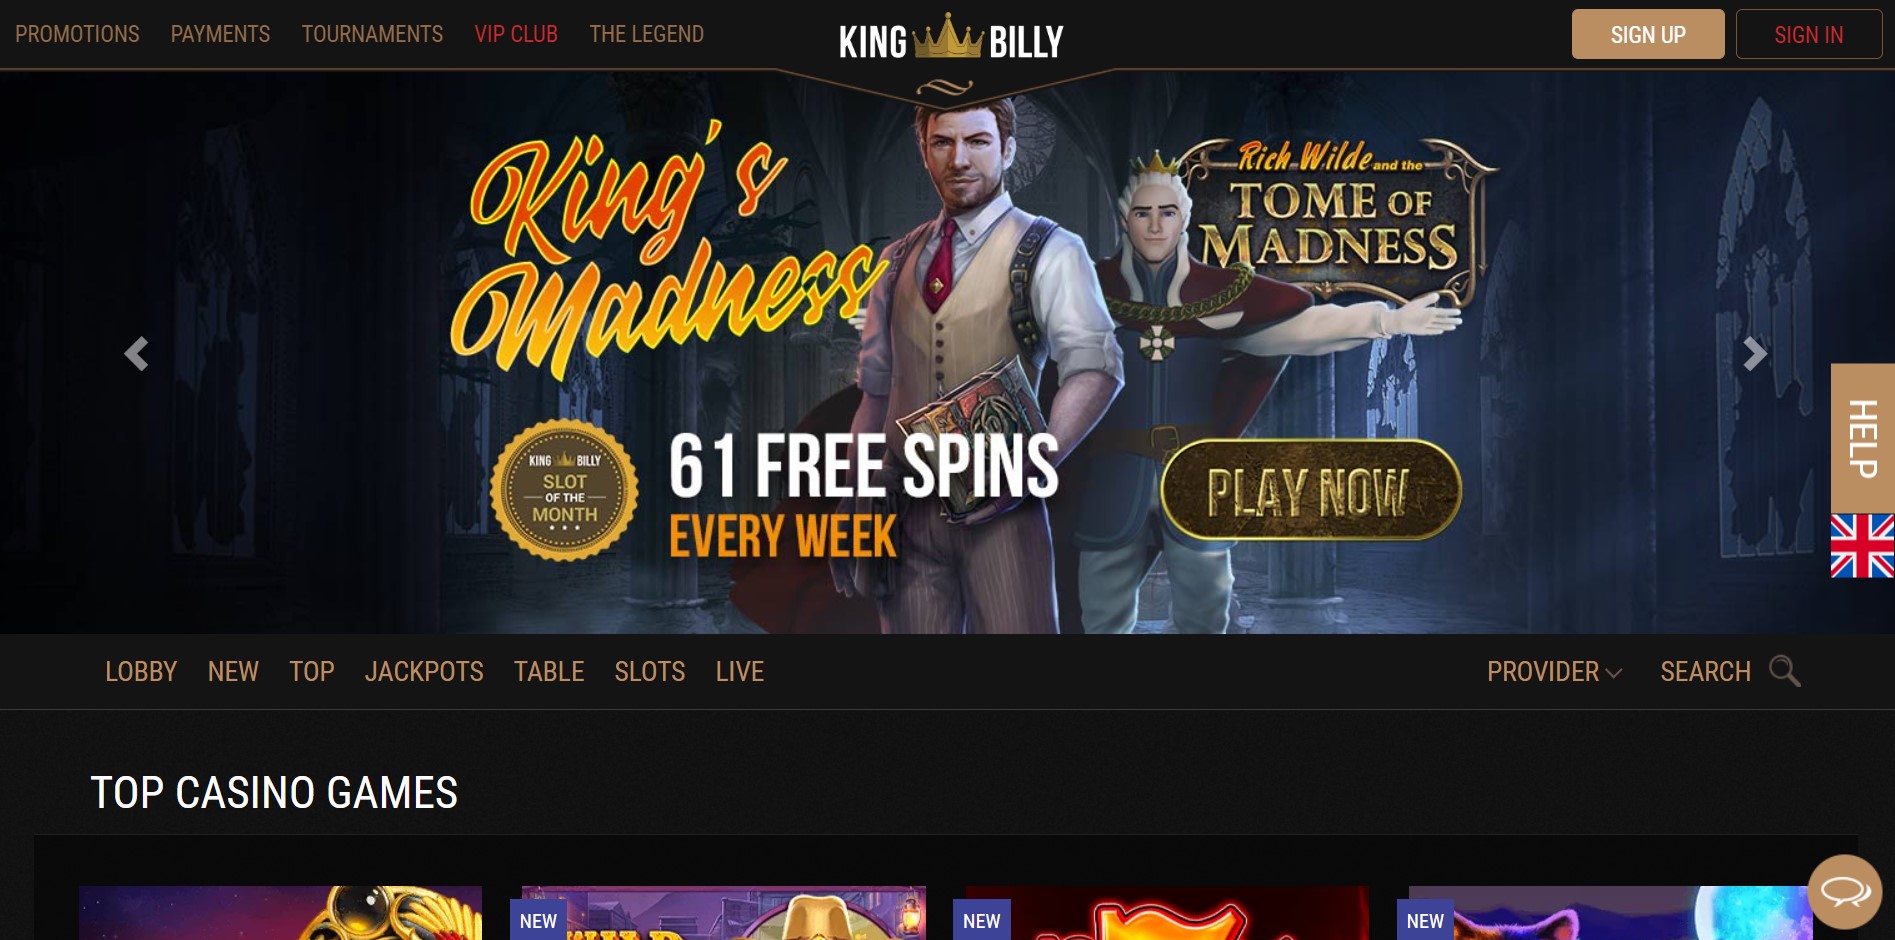 King Billy Free Spins